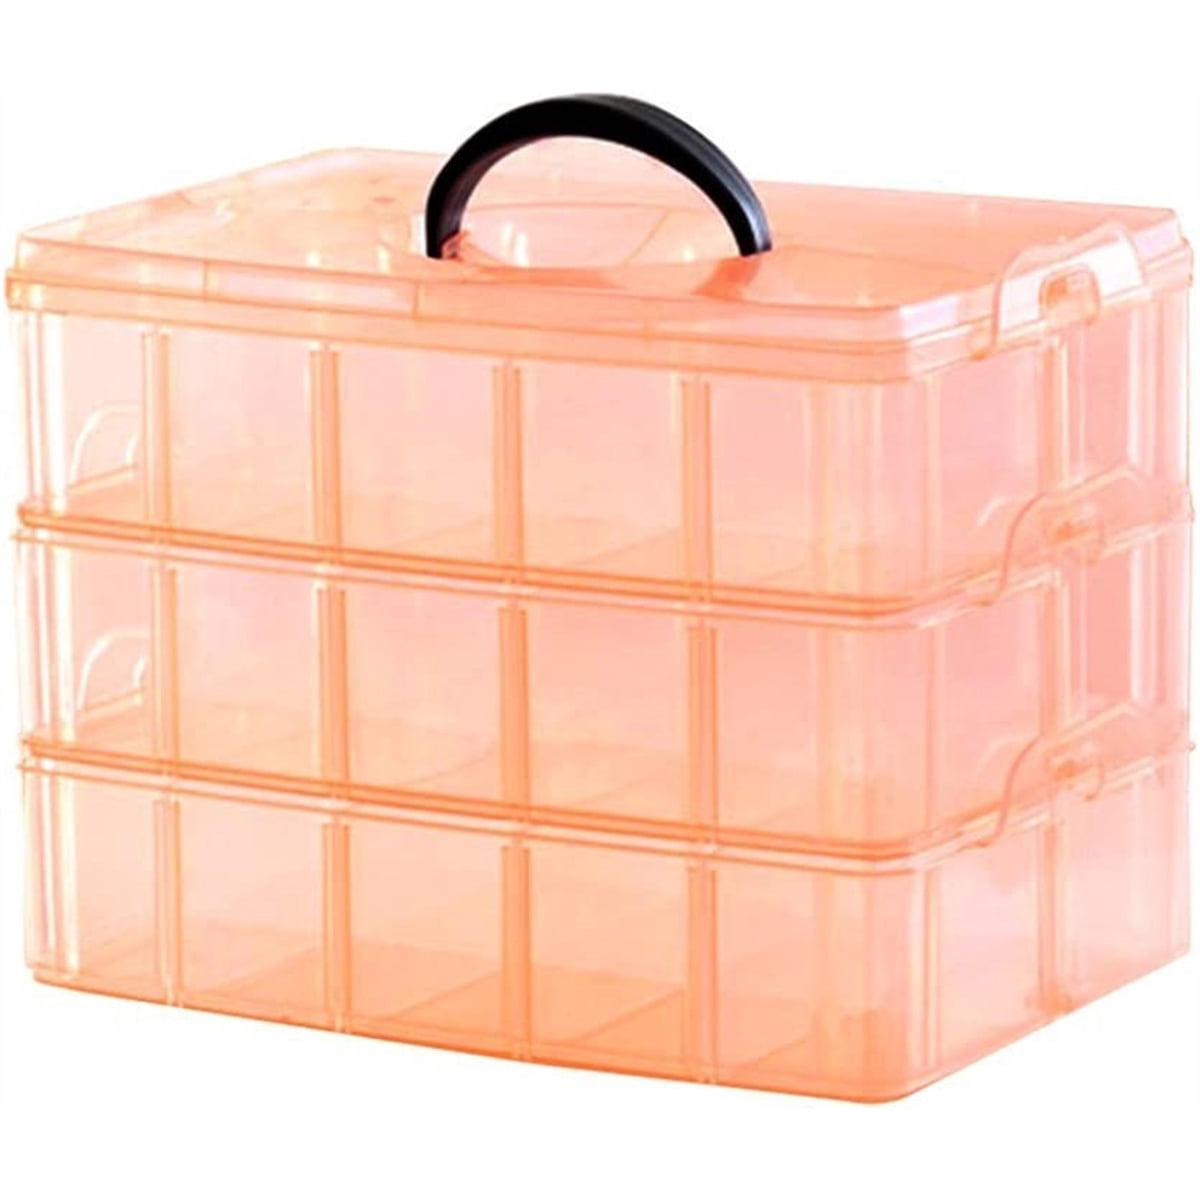 VILLCASE 3pcs Boxes apple storage box beads craft storage bead holder  organizer bead case loose bead container bead organizer small item carriers  bead